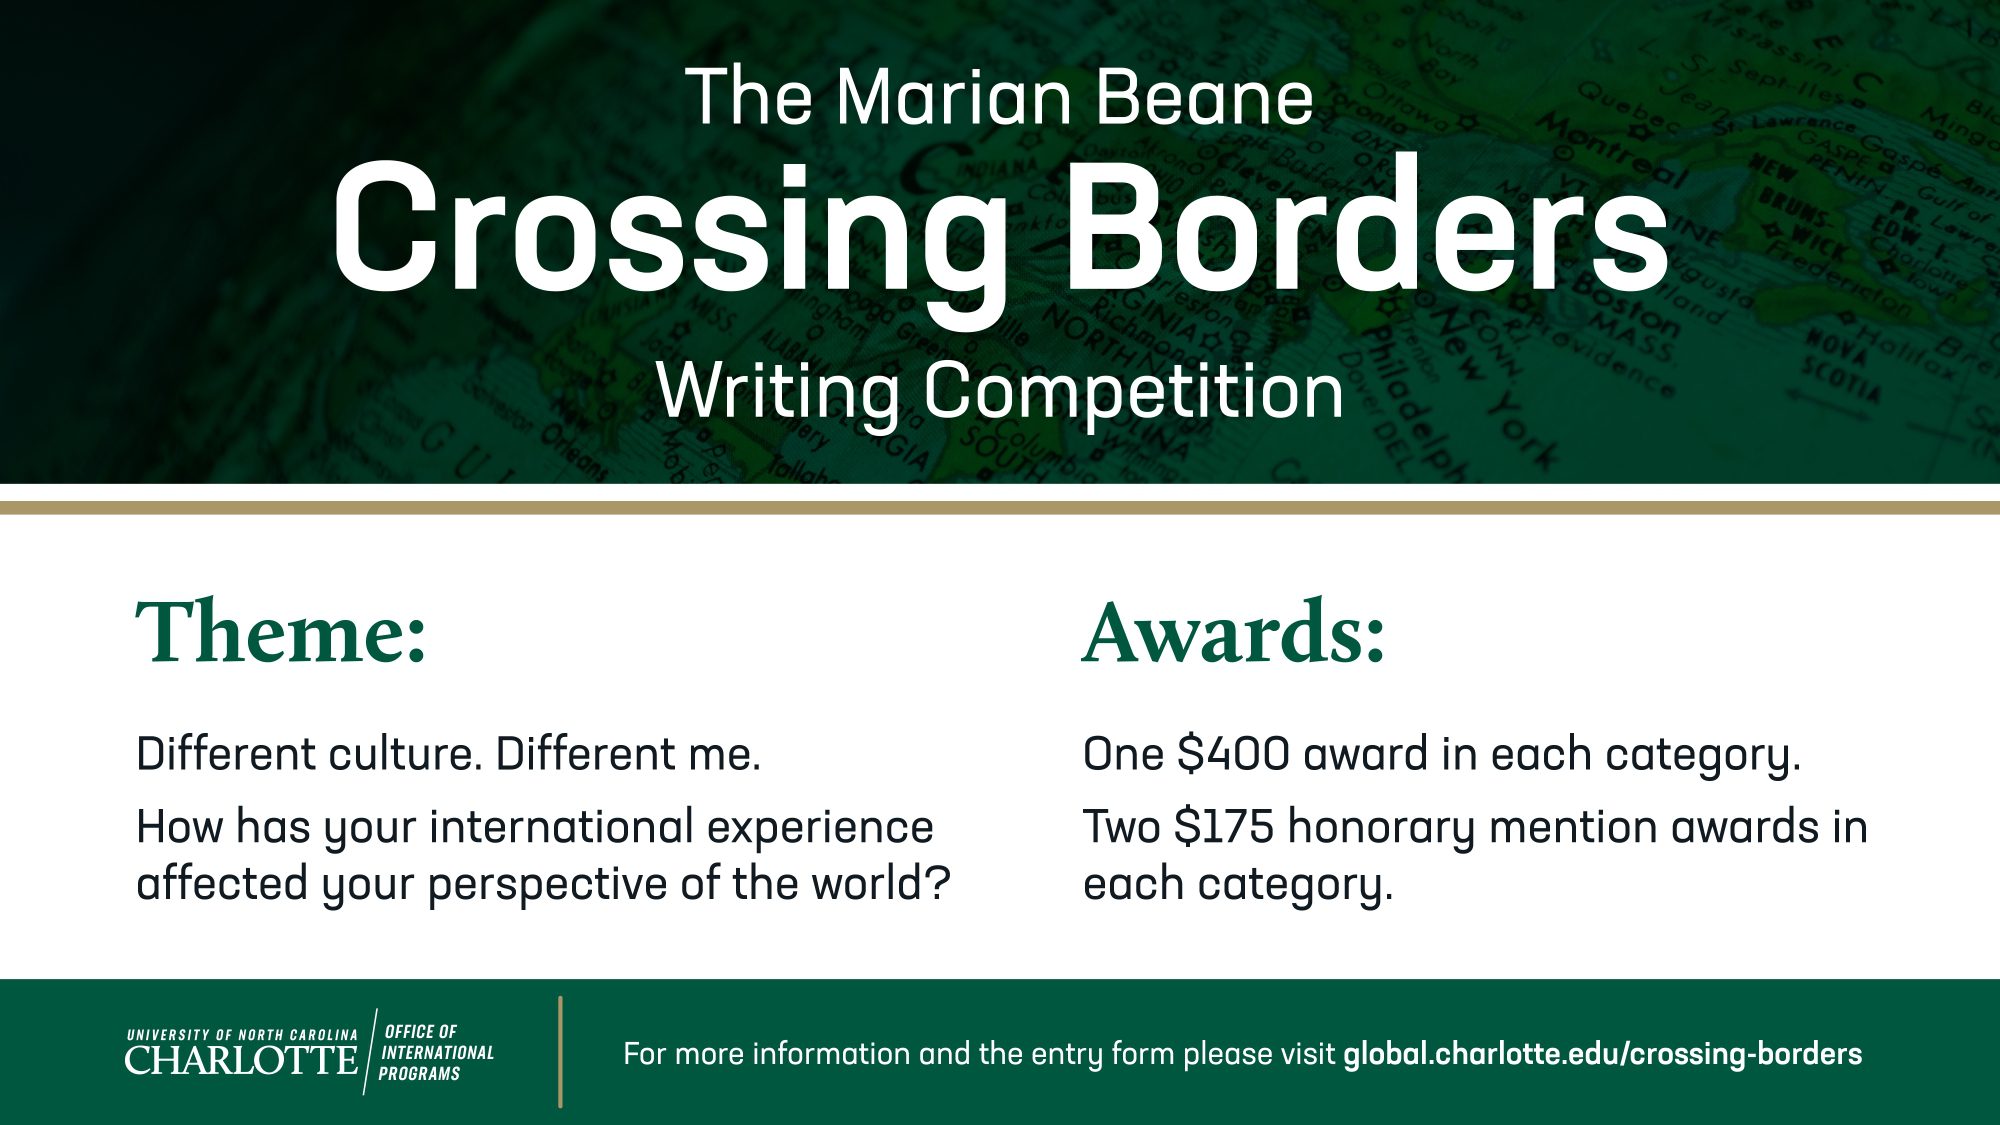 Marian Beane Crossing Borders Competition Image